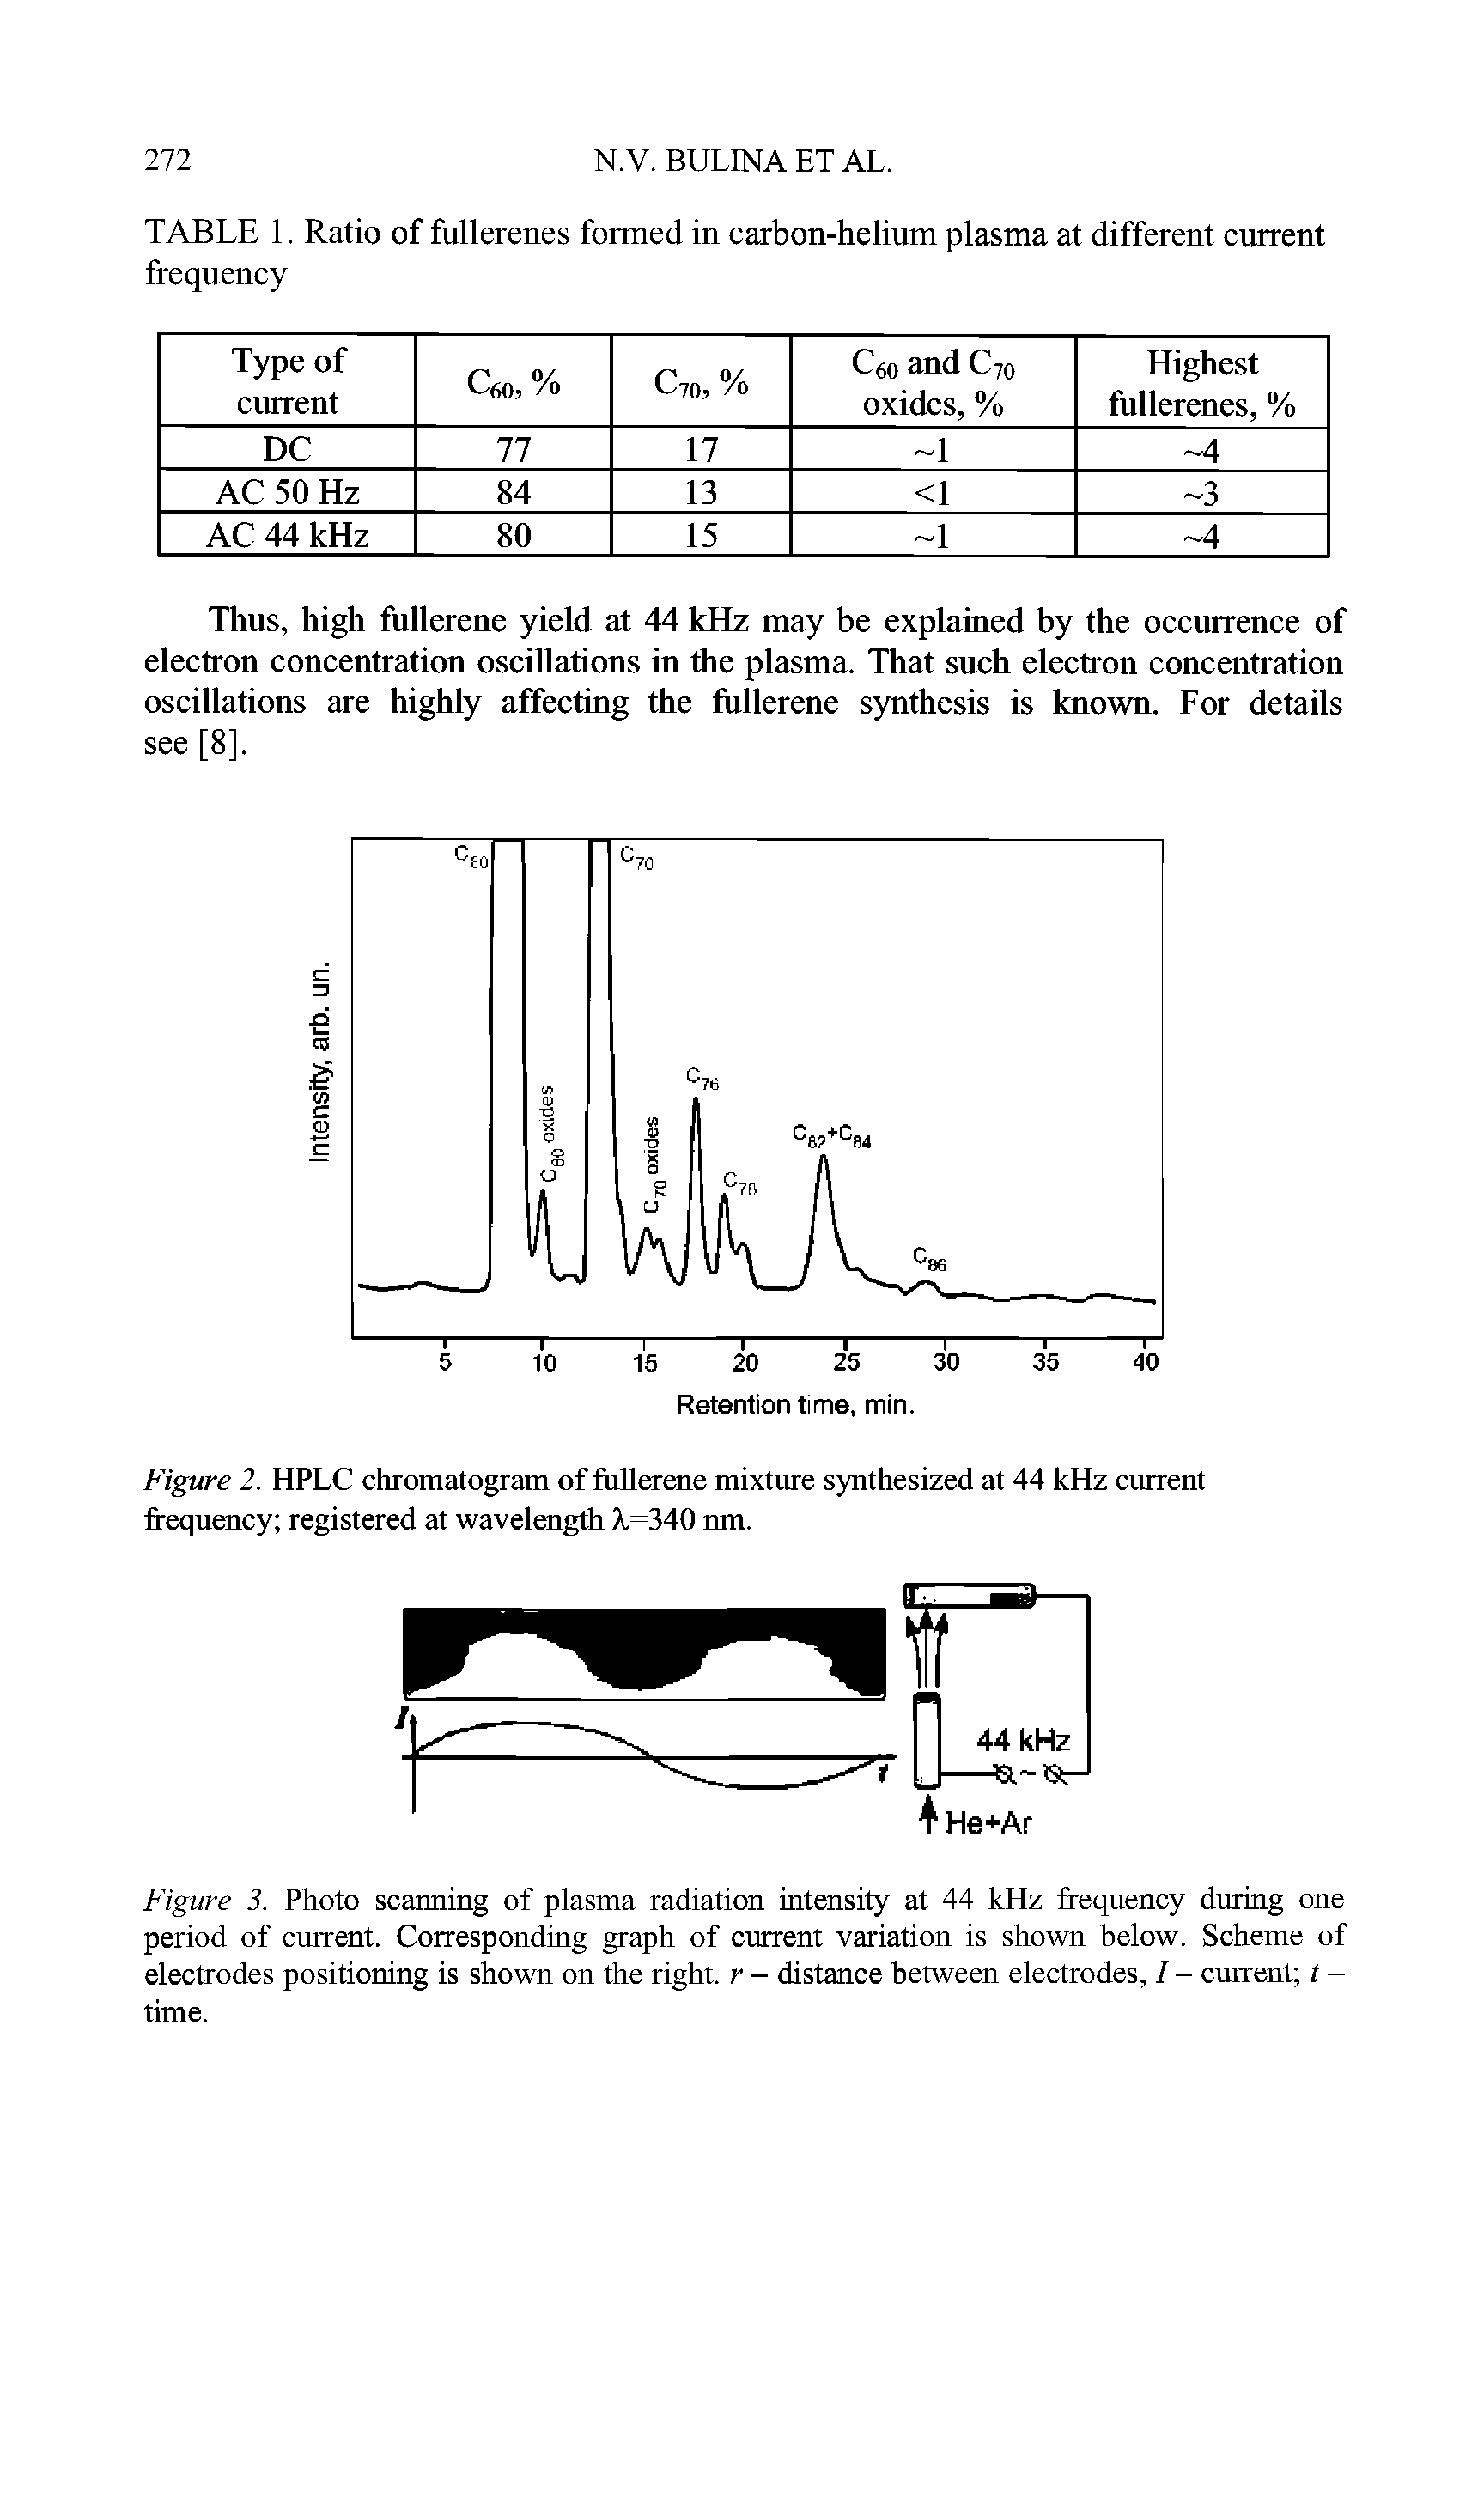 Figure 2. HPLC chromatogram of fullerene mixture synthesized at 44 kHz current frequency registered at wavelength X 340 nm.